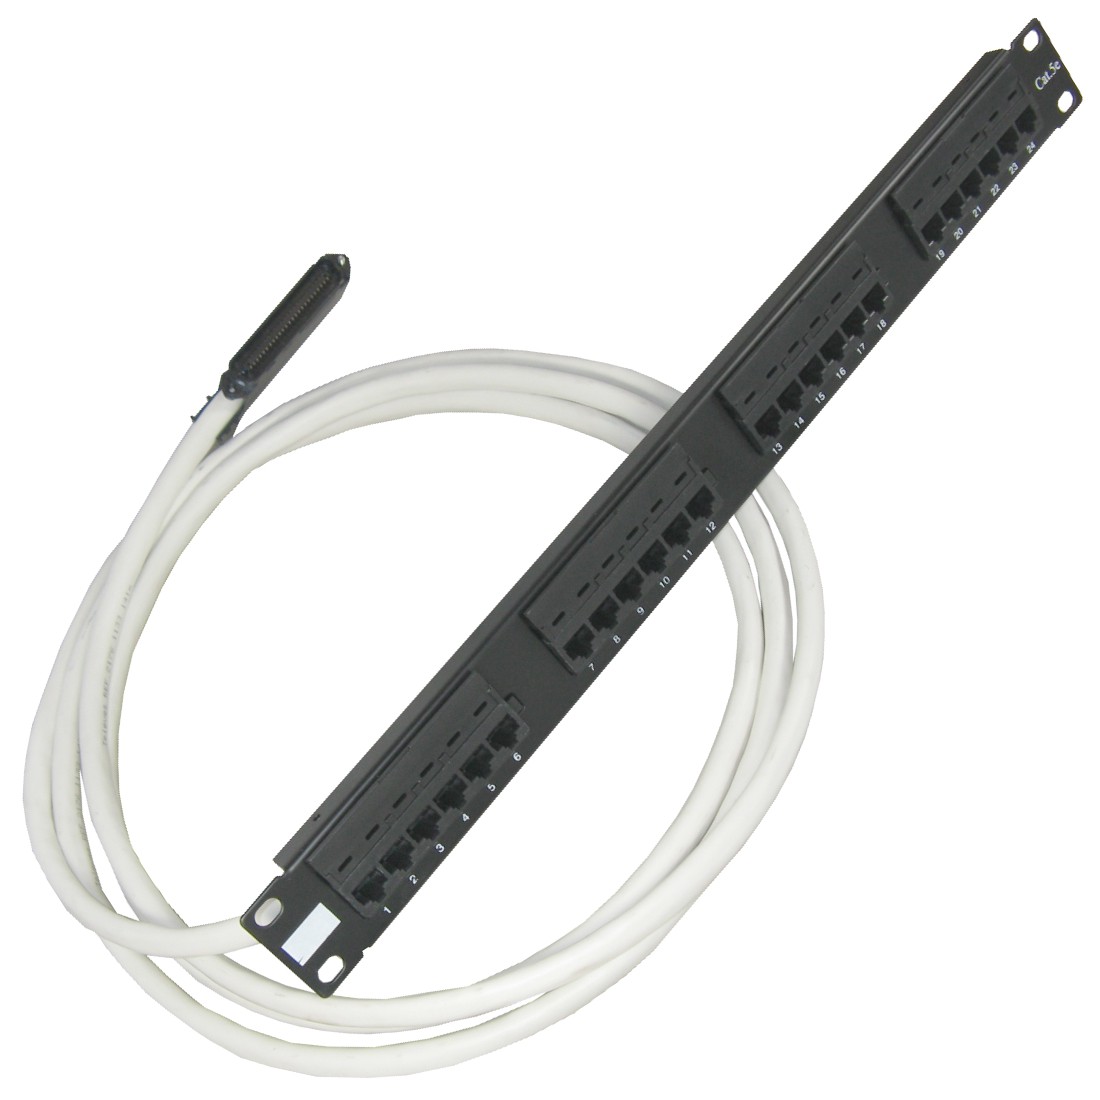 Telco RJ21 Cable to RJ45 PatchPanel 19 